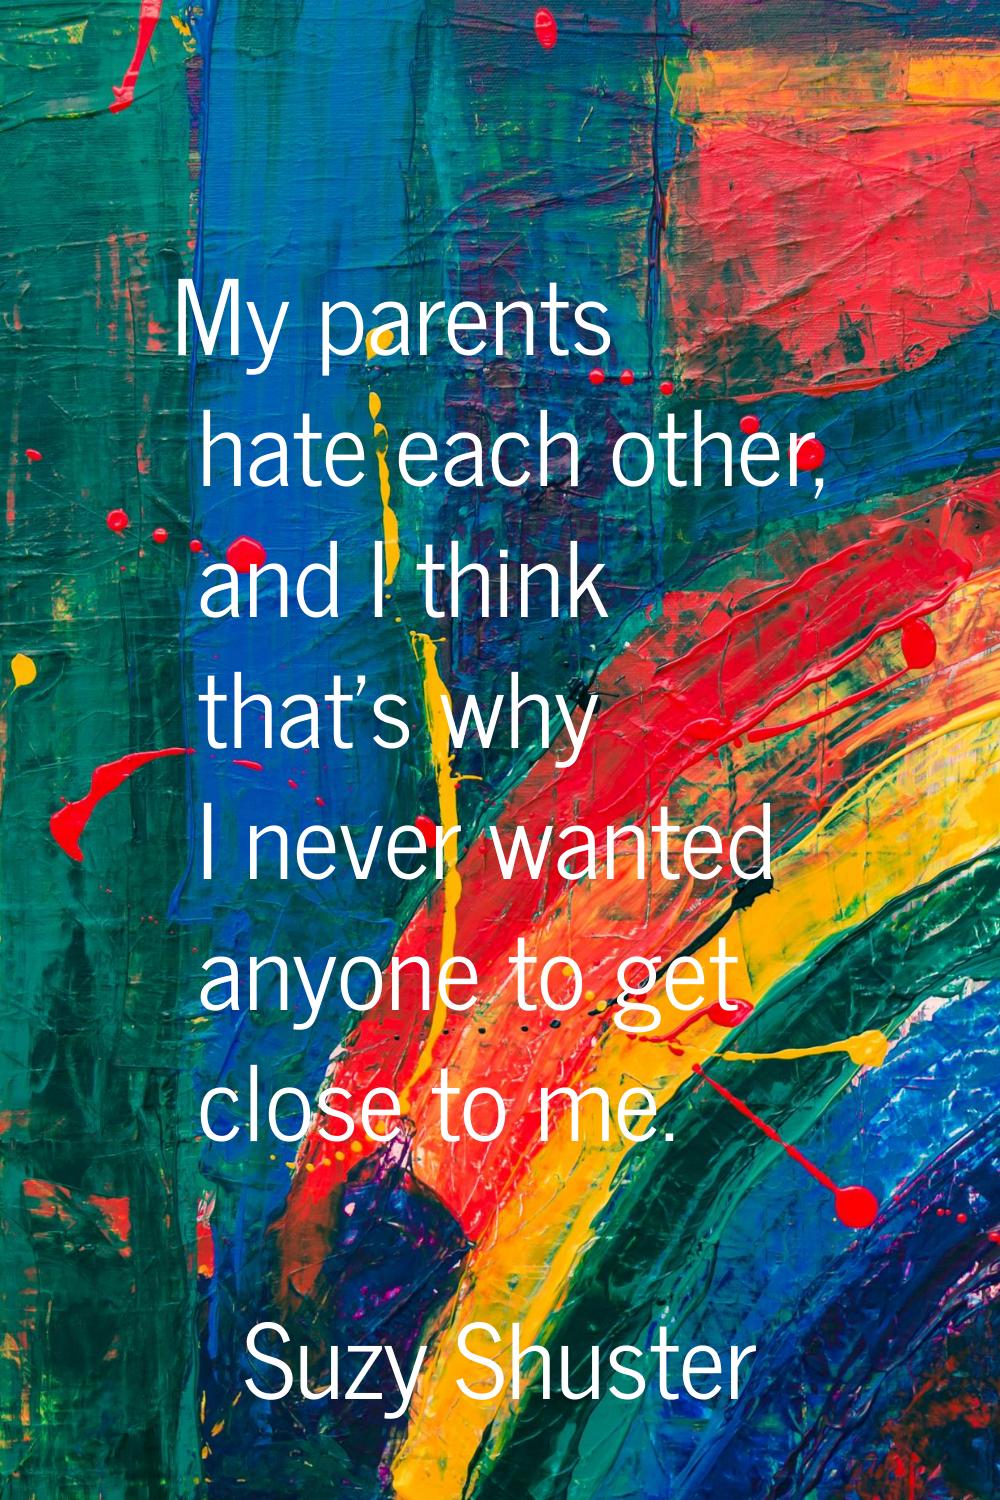 My parents hate each other, and I think that's why I never wanted anyone to get close to me.